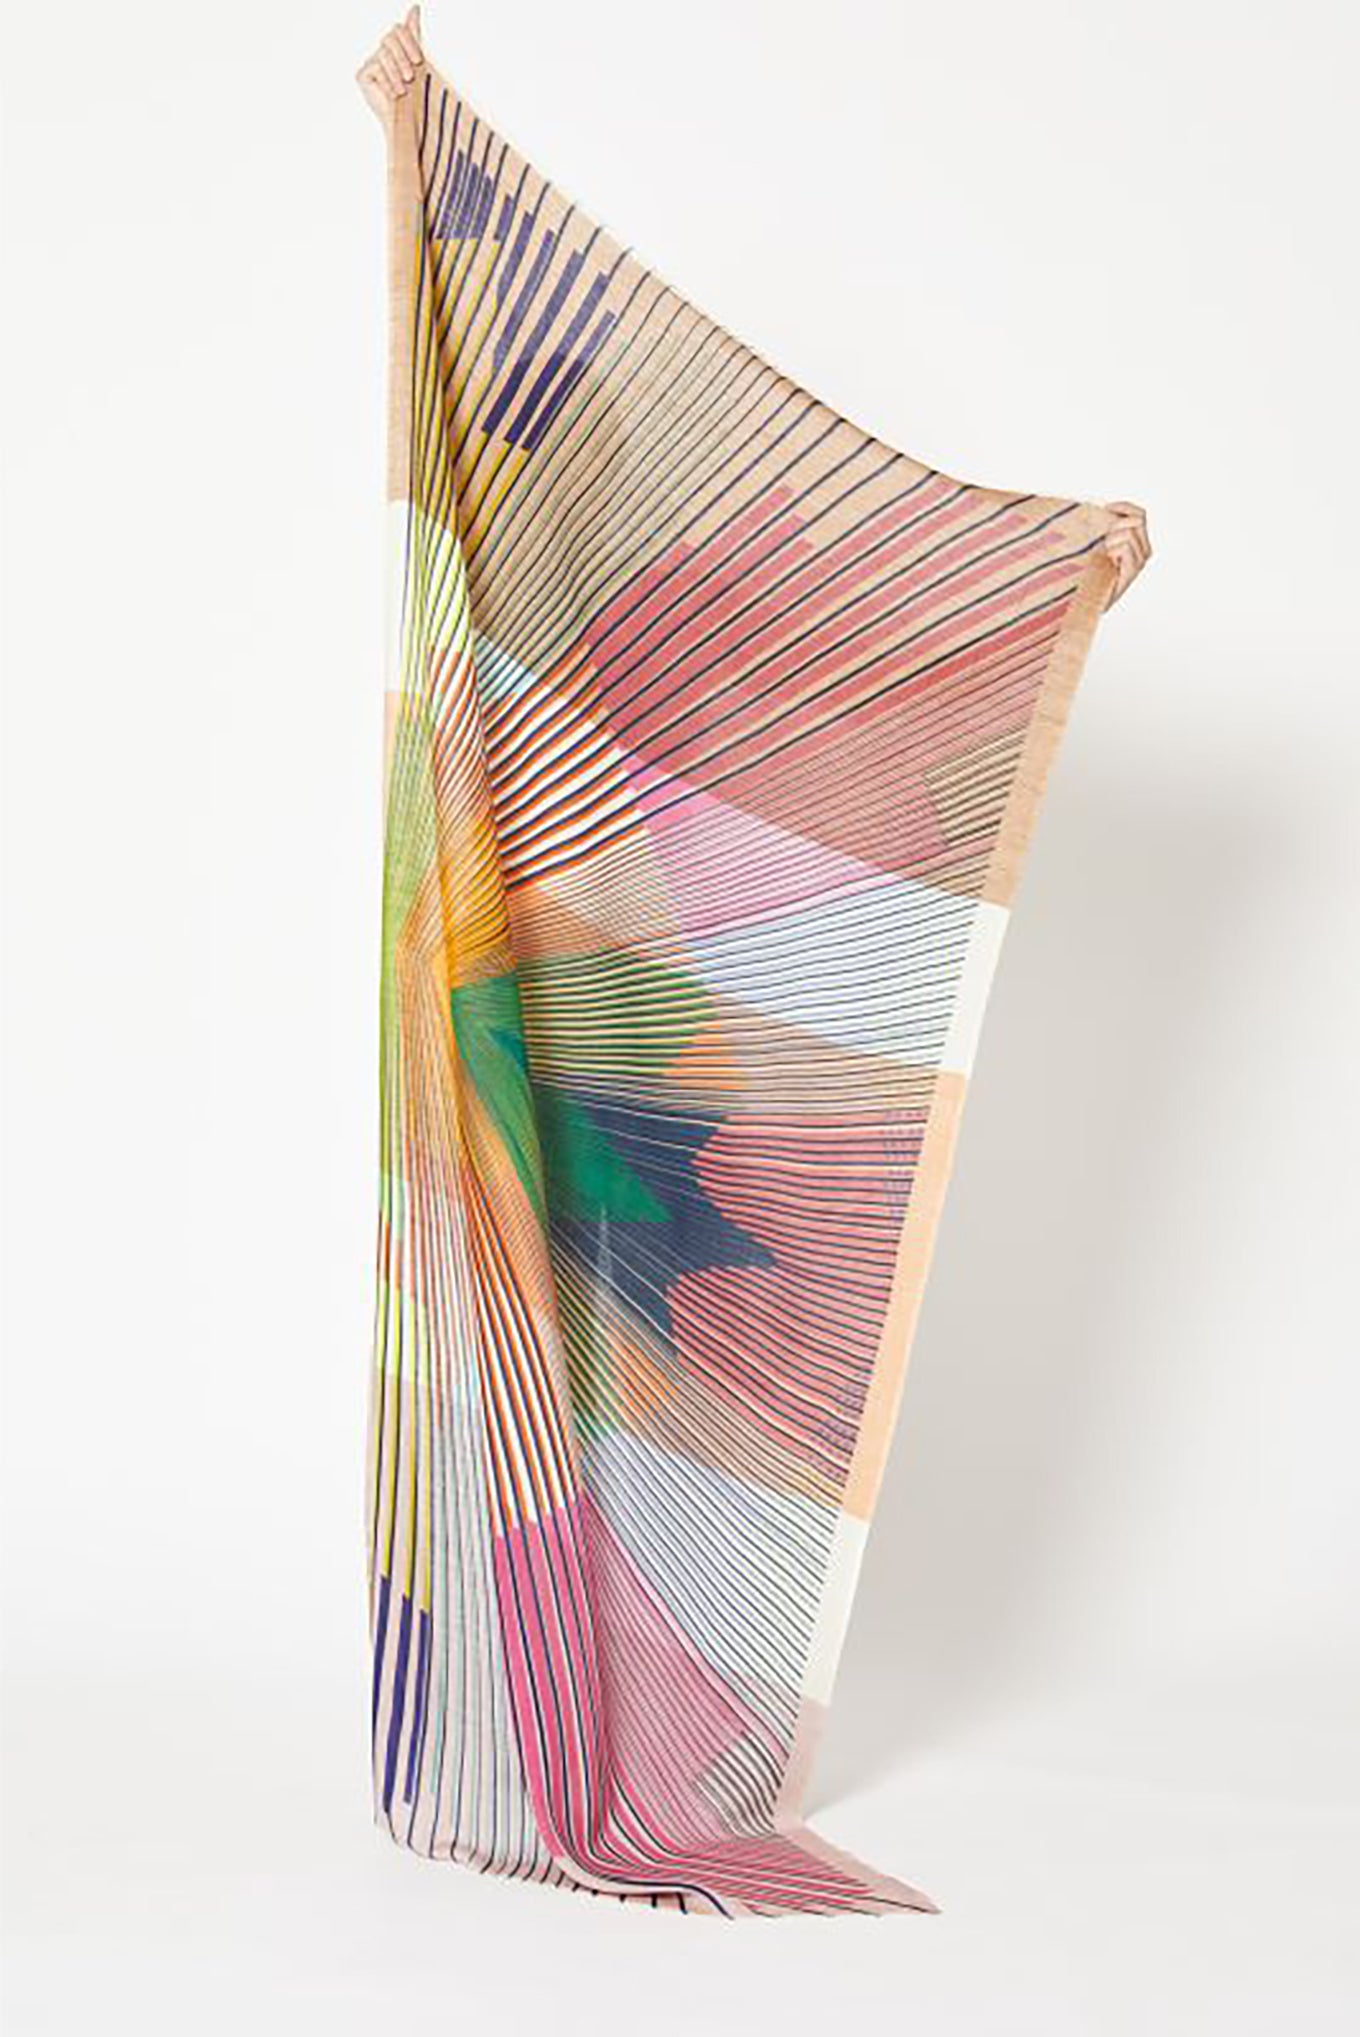 Ma Poesie Sequence wool scarf in passion, multicolour graphic design.